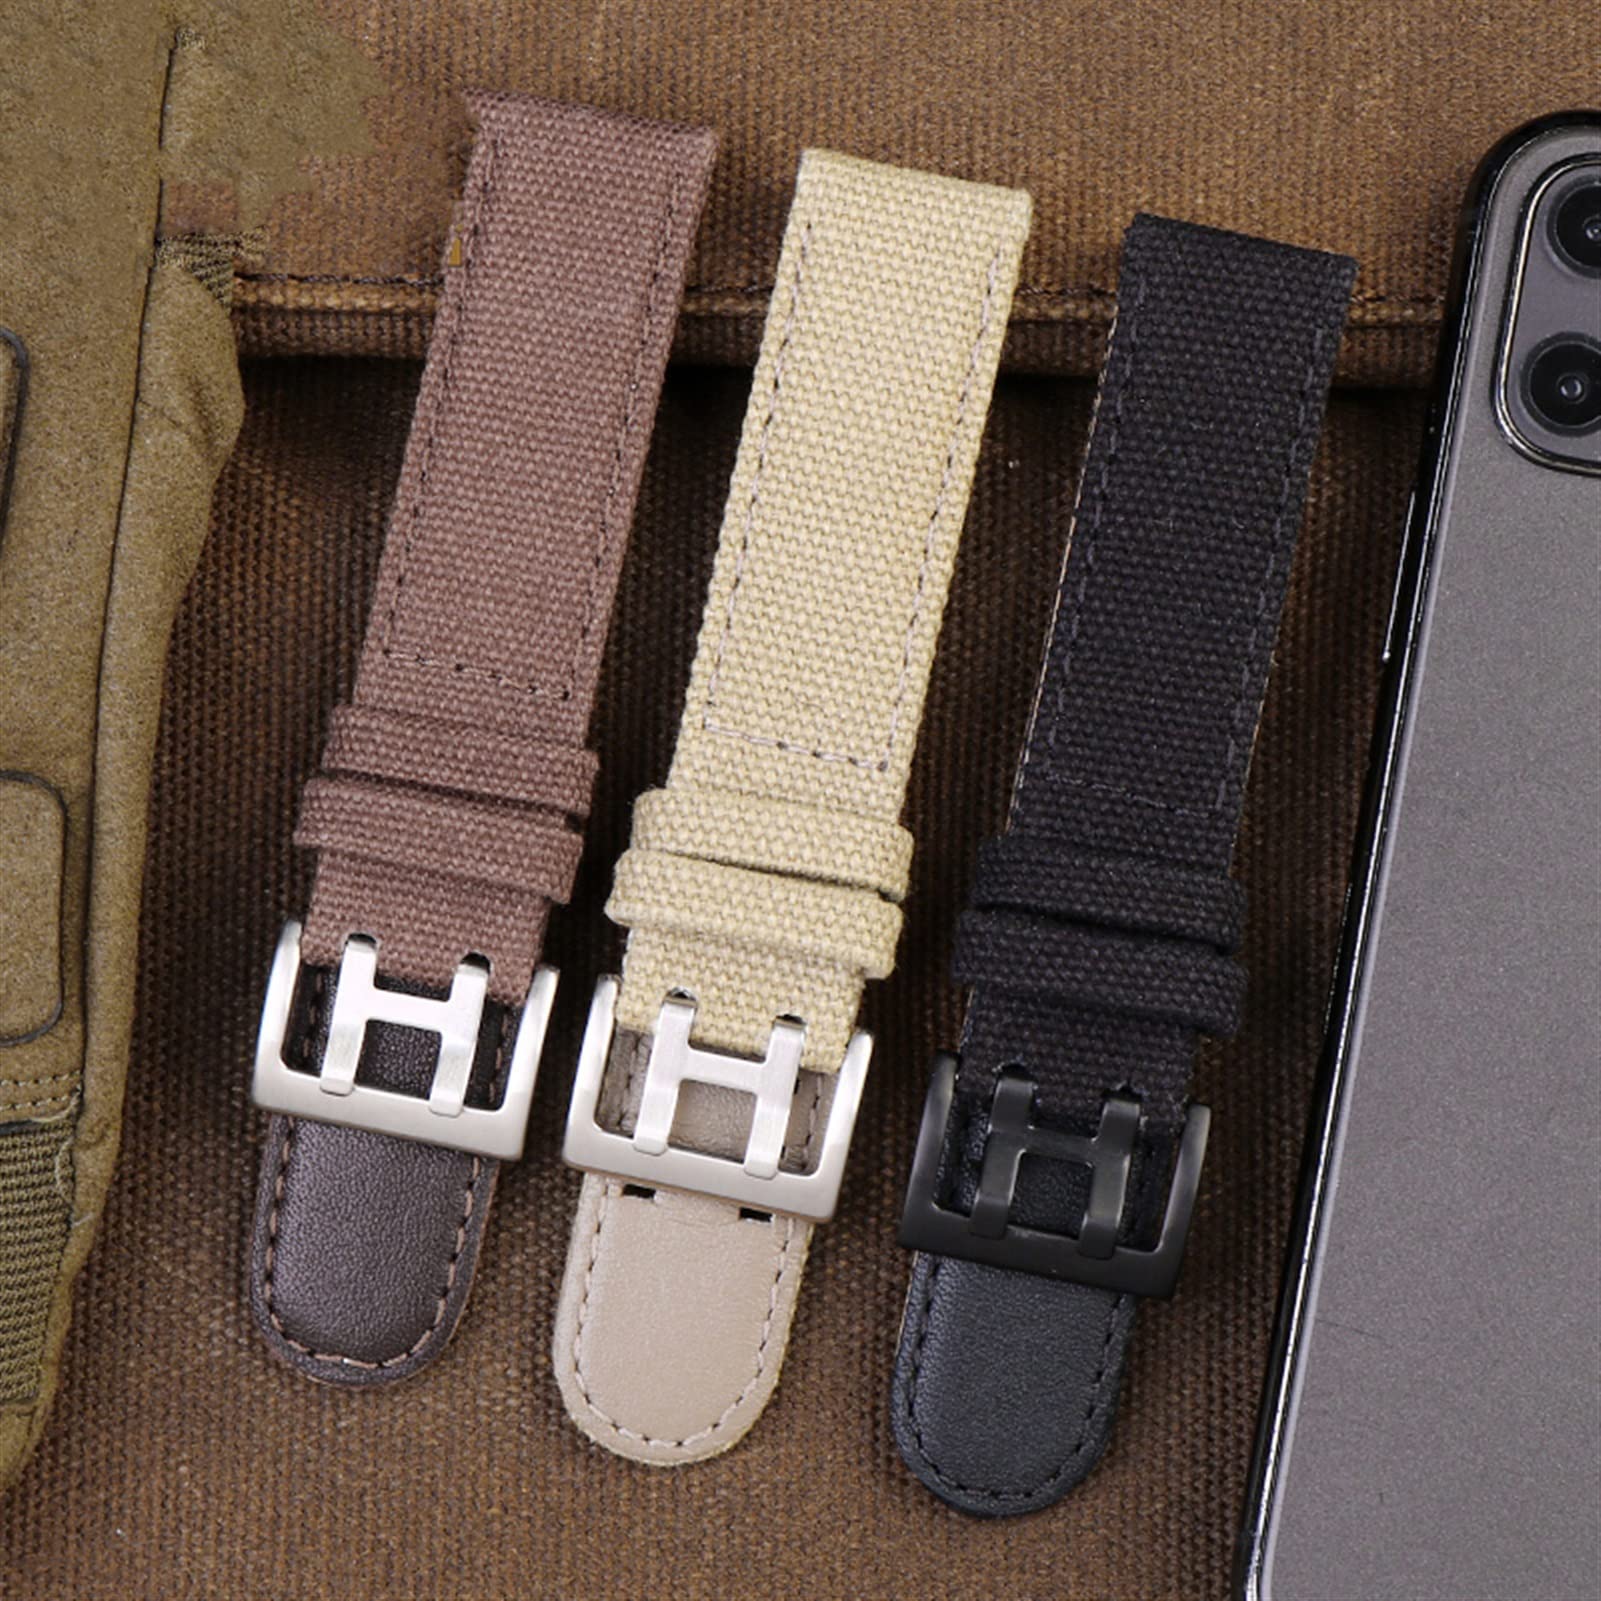 HAODEE for Hamilton Khaki Field Watch h760250/h77616533/h70605963 H68201993 Watch Strap Genuine Leather Nylon Men Watch Band 20mm 22mm (Color : Khaki Black Clasp, Size : 20mm)